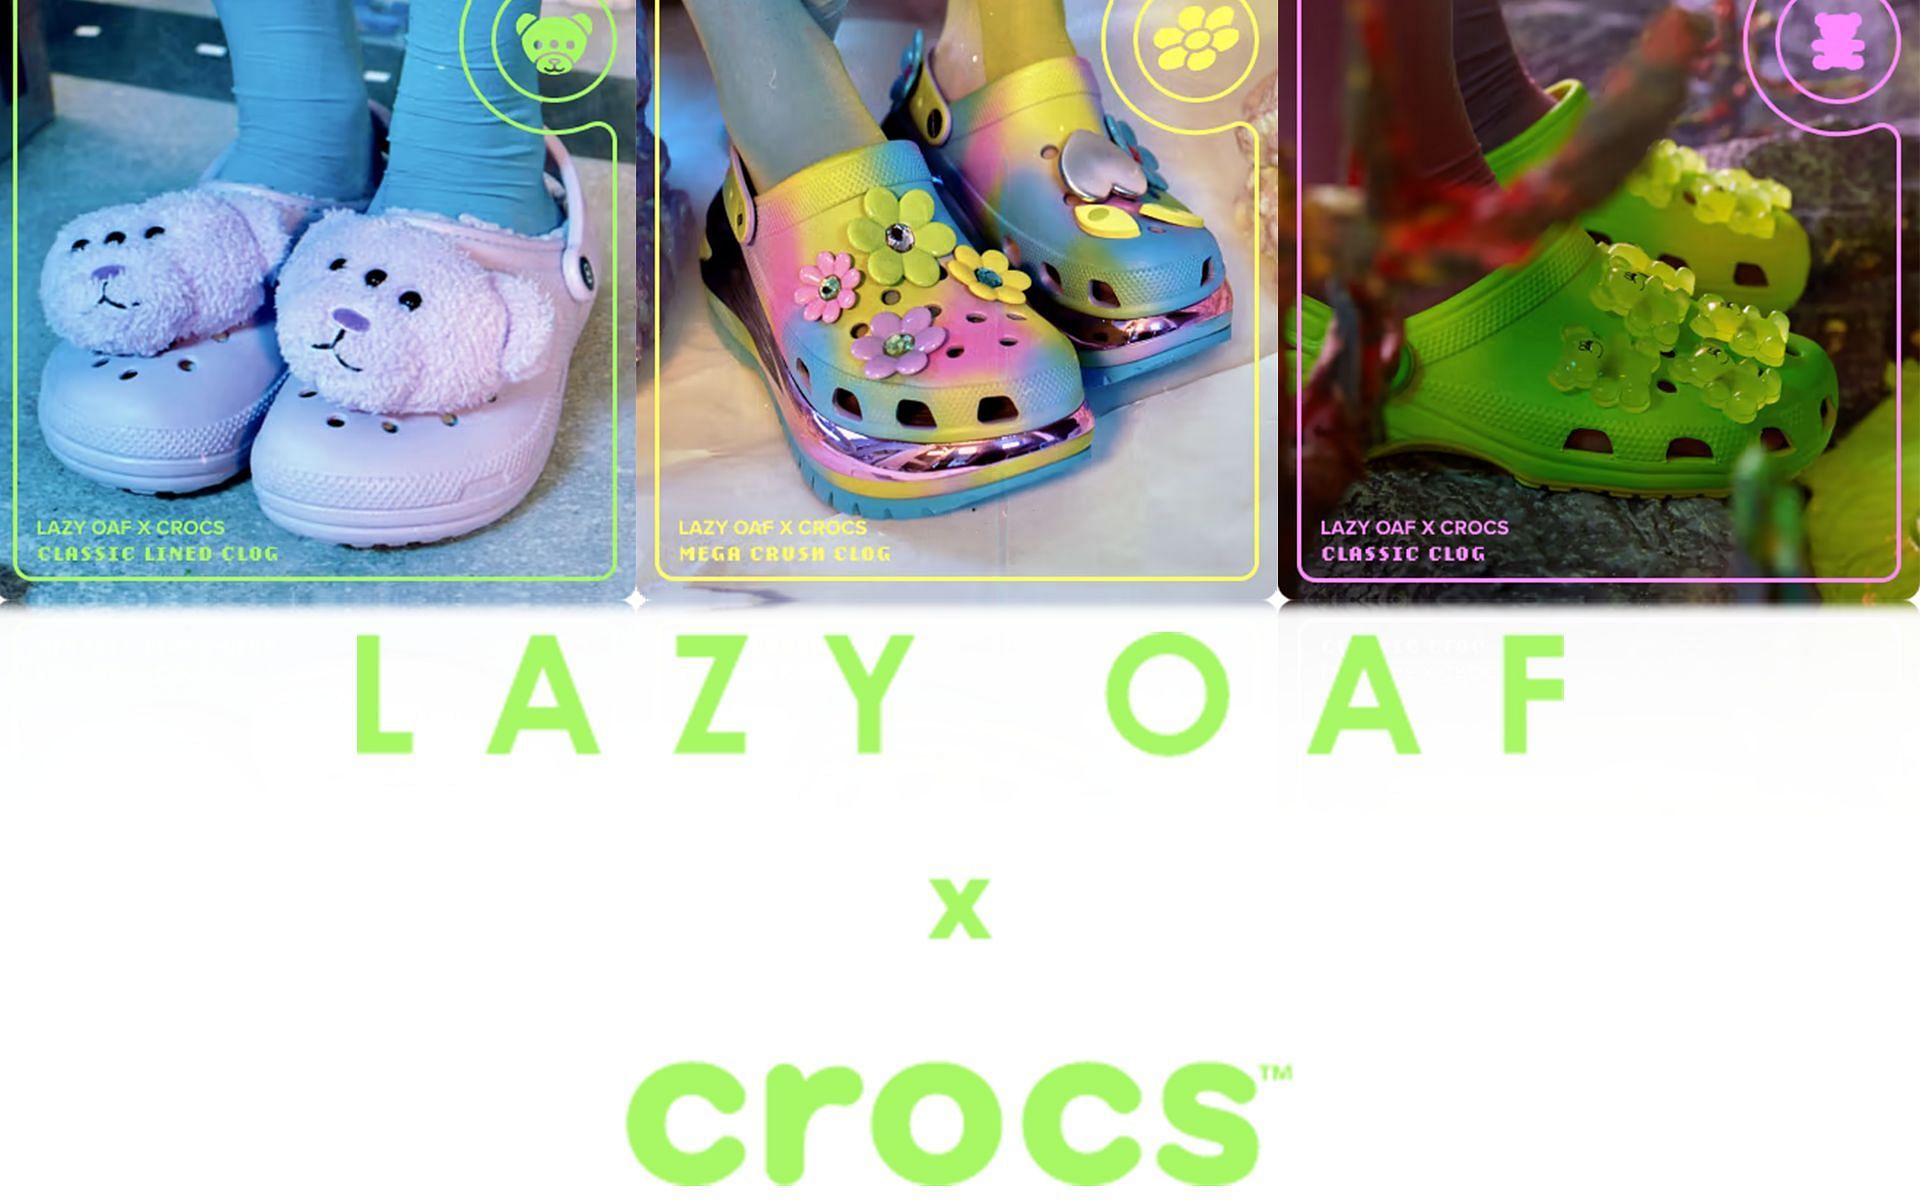 Crocs X Lazy Oaf: Where to buy, price, release date, and more about the ...